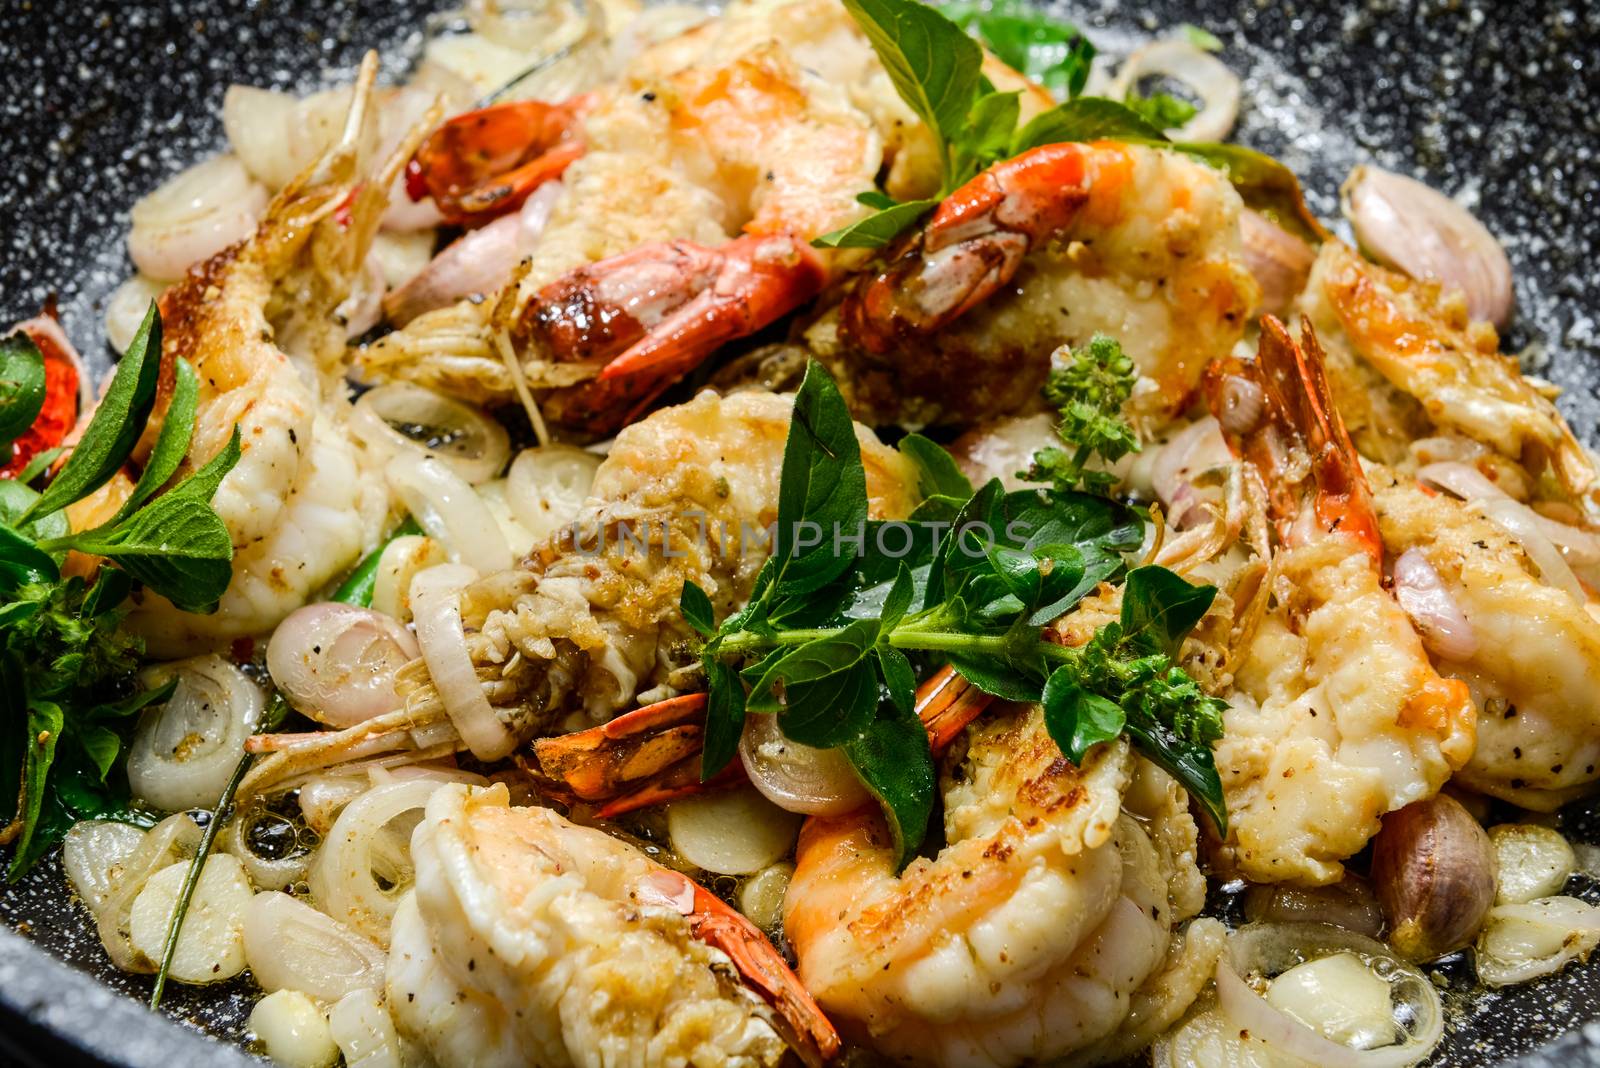 Shrimps in the pan by p.studio66